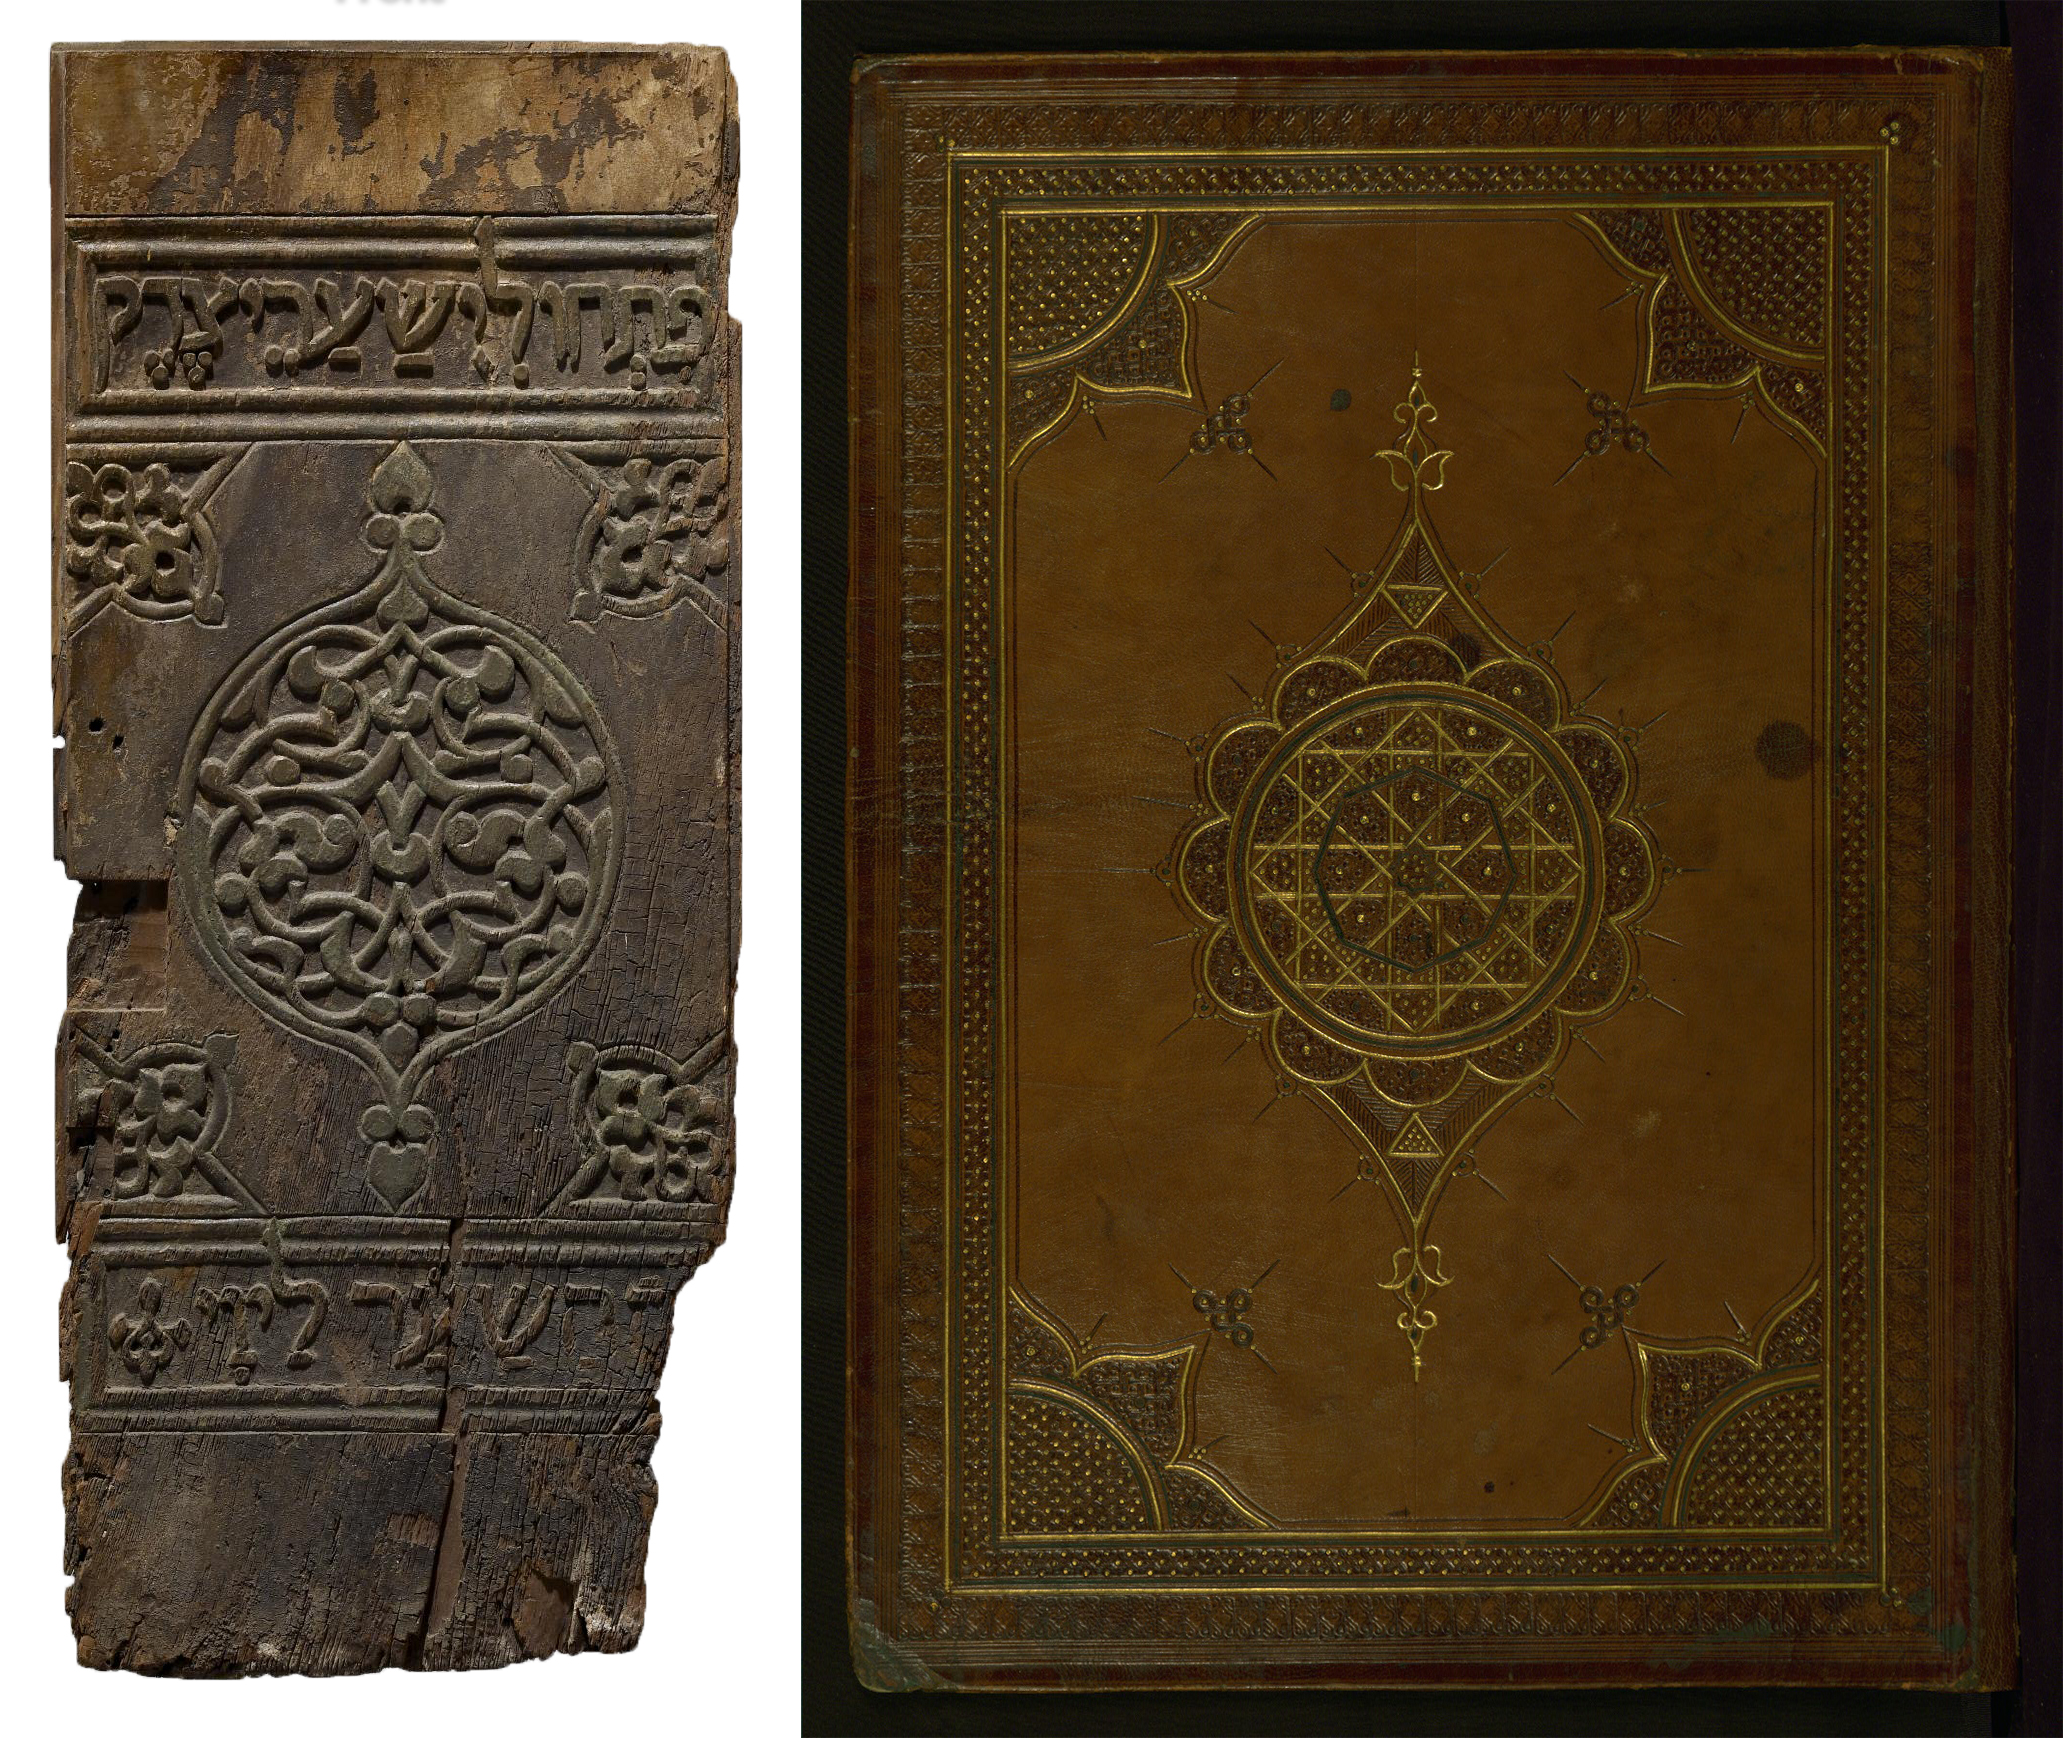 Left: panel from a Torah Ark door, Ben Ezra Synagogue, Fustat, Egypt, 11th century with later carving and paint, wood (walnut) with traces of paint and gilding, 87.3 x 36.7 x 2.5 cm (The Walters Art Museum and Yeshiva University Museum); right: Qur'an, Cairo, Egypt, 14th century (The Walters Art Museum)